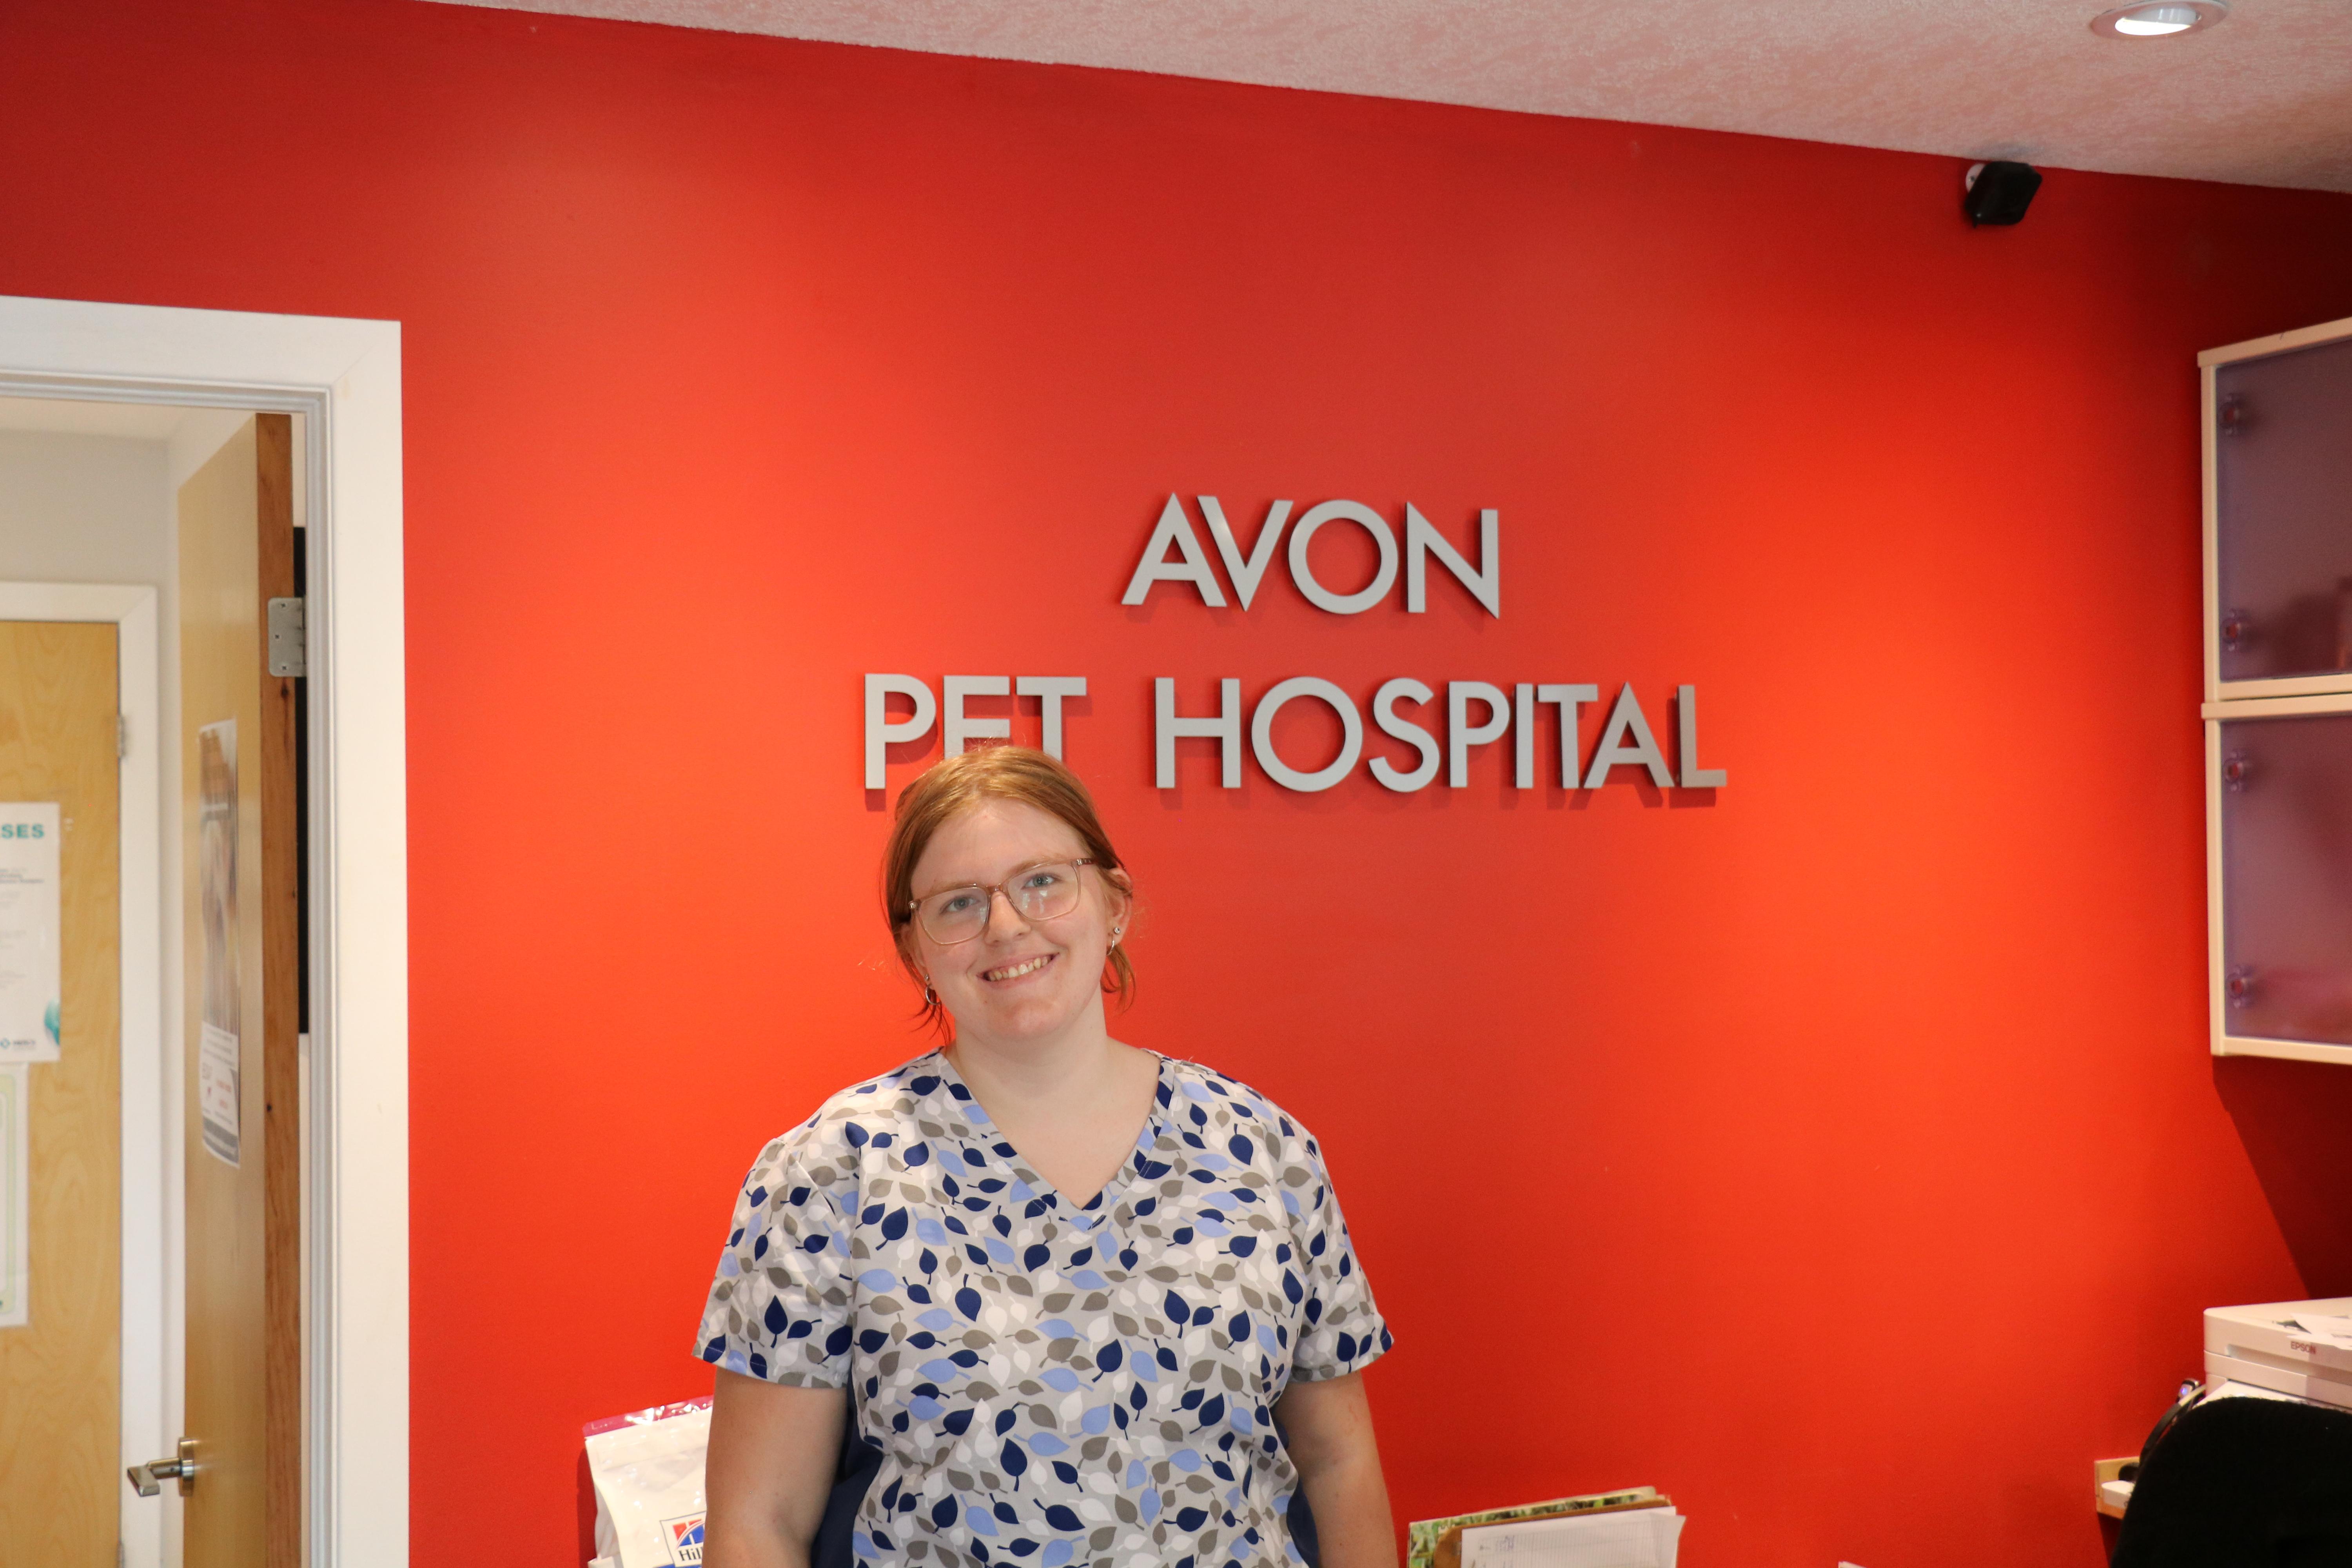 student in front of Avon Pet Hospital sign